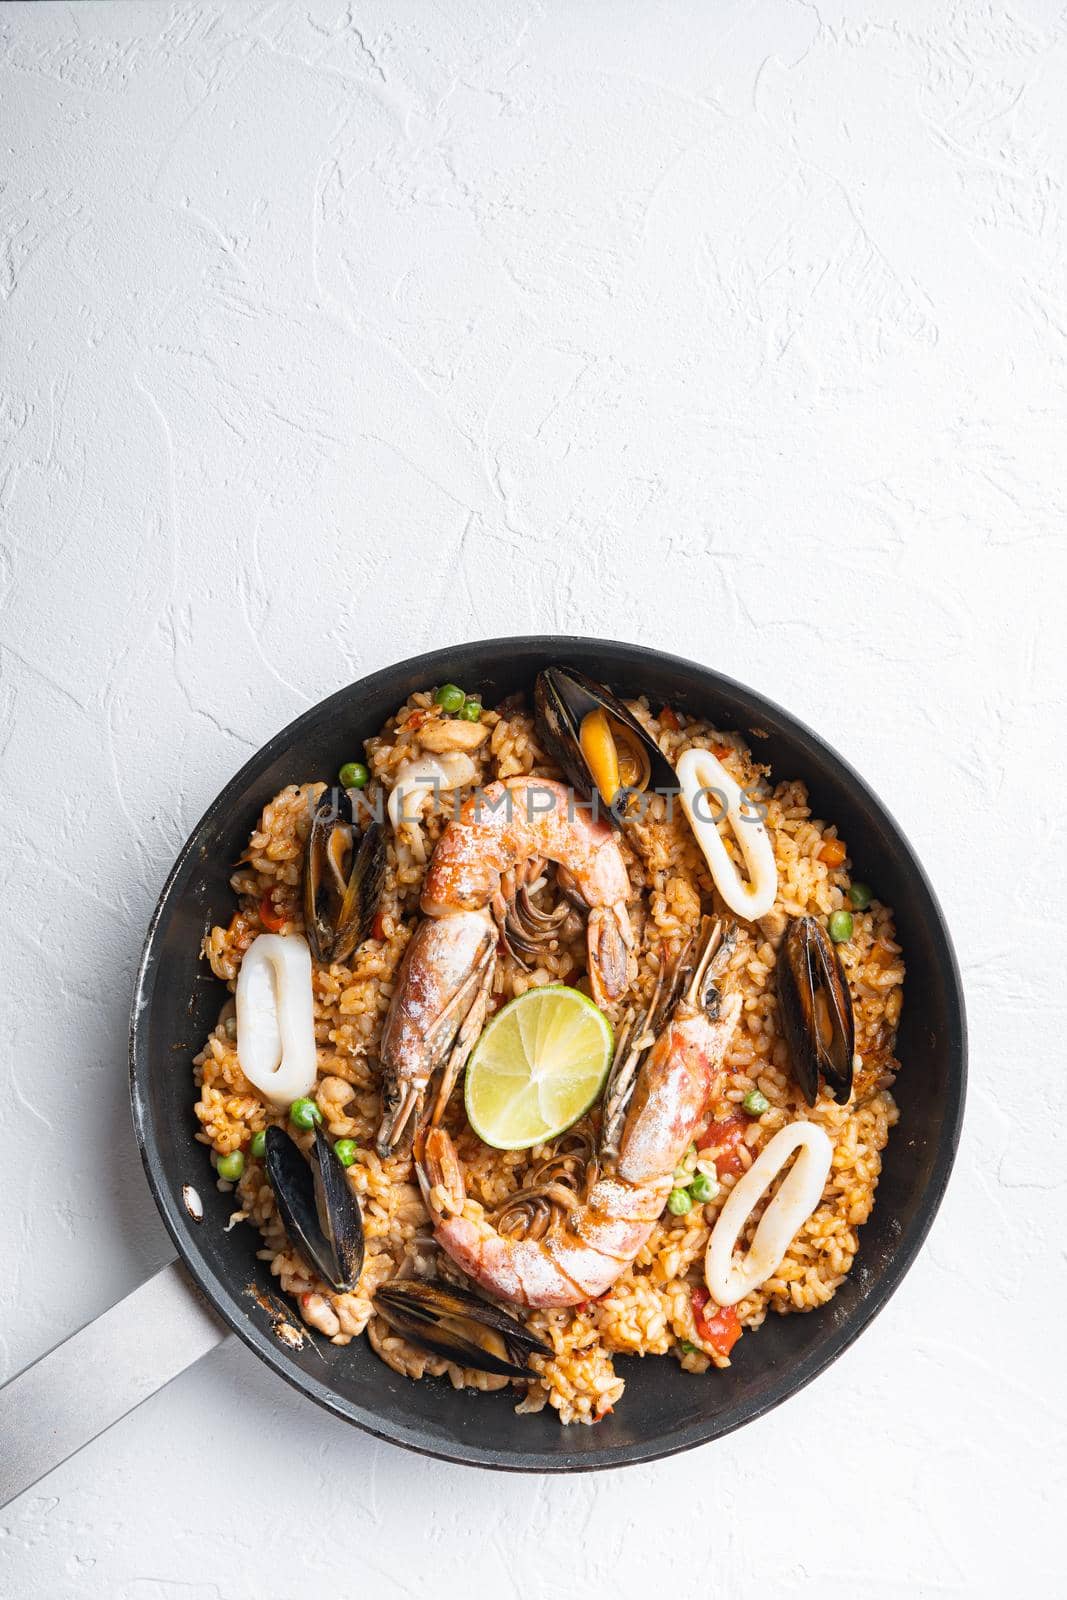 Seafood and chicken paella with rice, mussles, shrimps,chicken, tomatoes and wine in pan on white textured background, flat lay with copy space by Ilianesolenyi